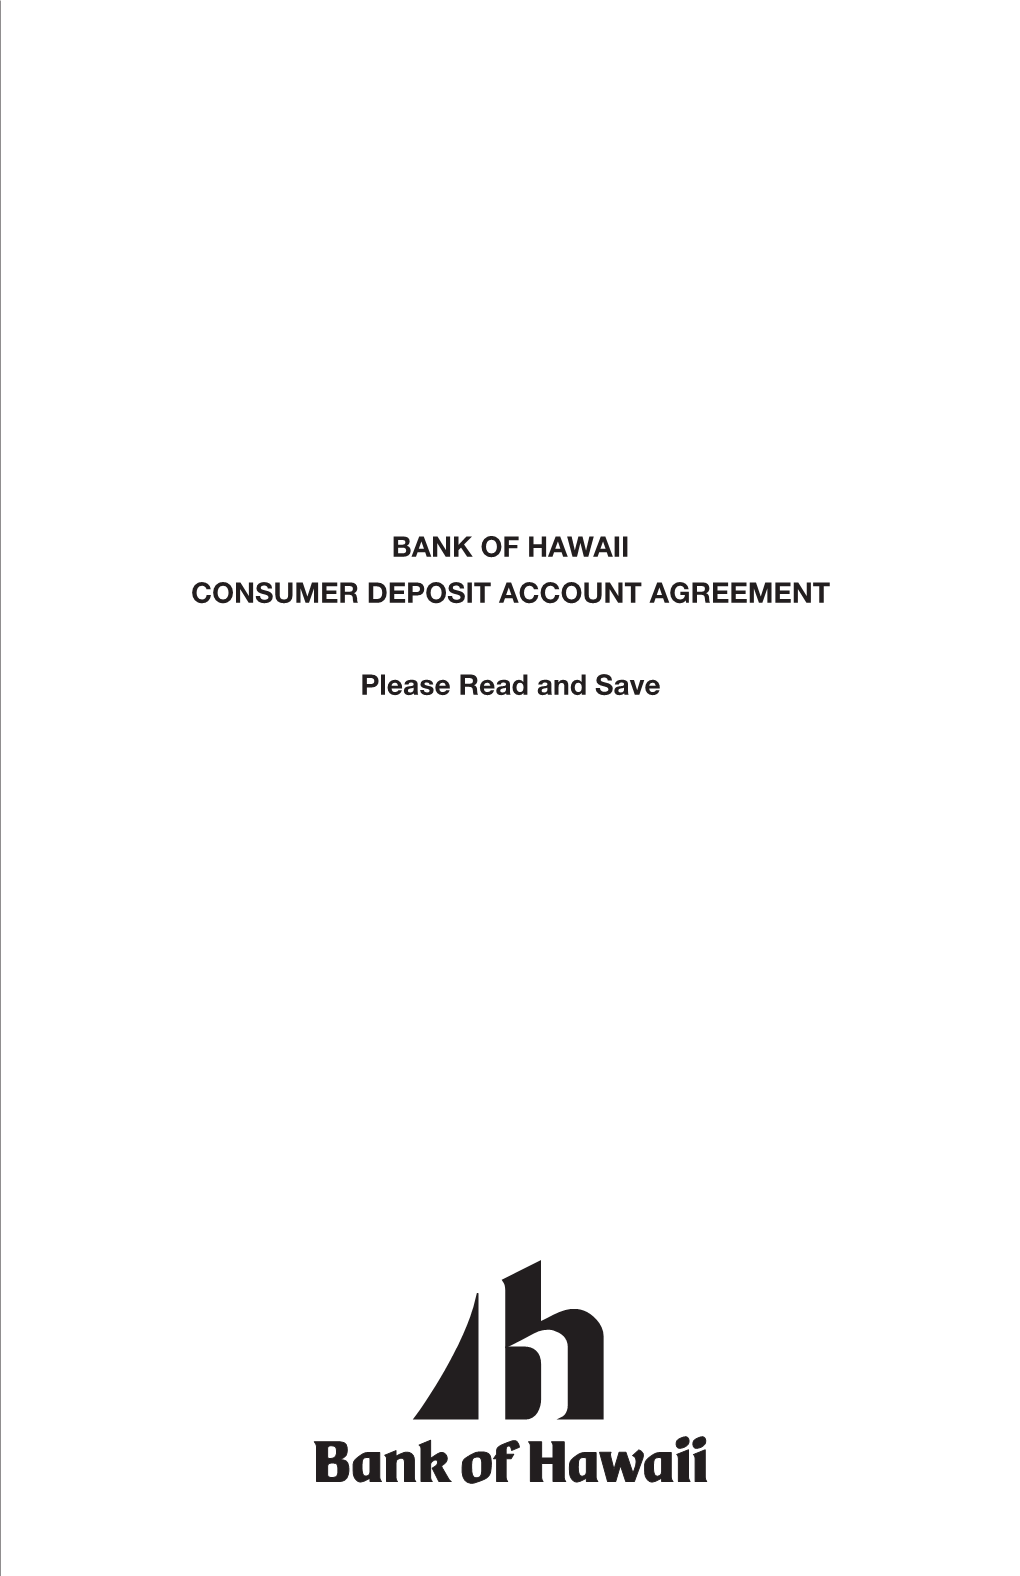 BANK of HAWAII CONSUMER DEPOSIT ACCOUNT AGREEMENT Please Read and Save